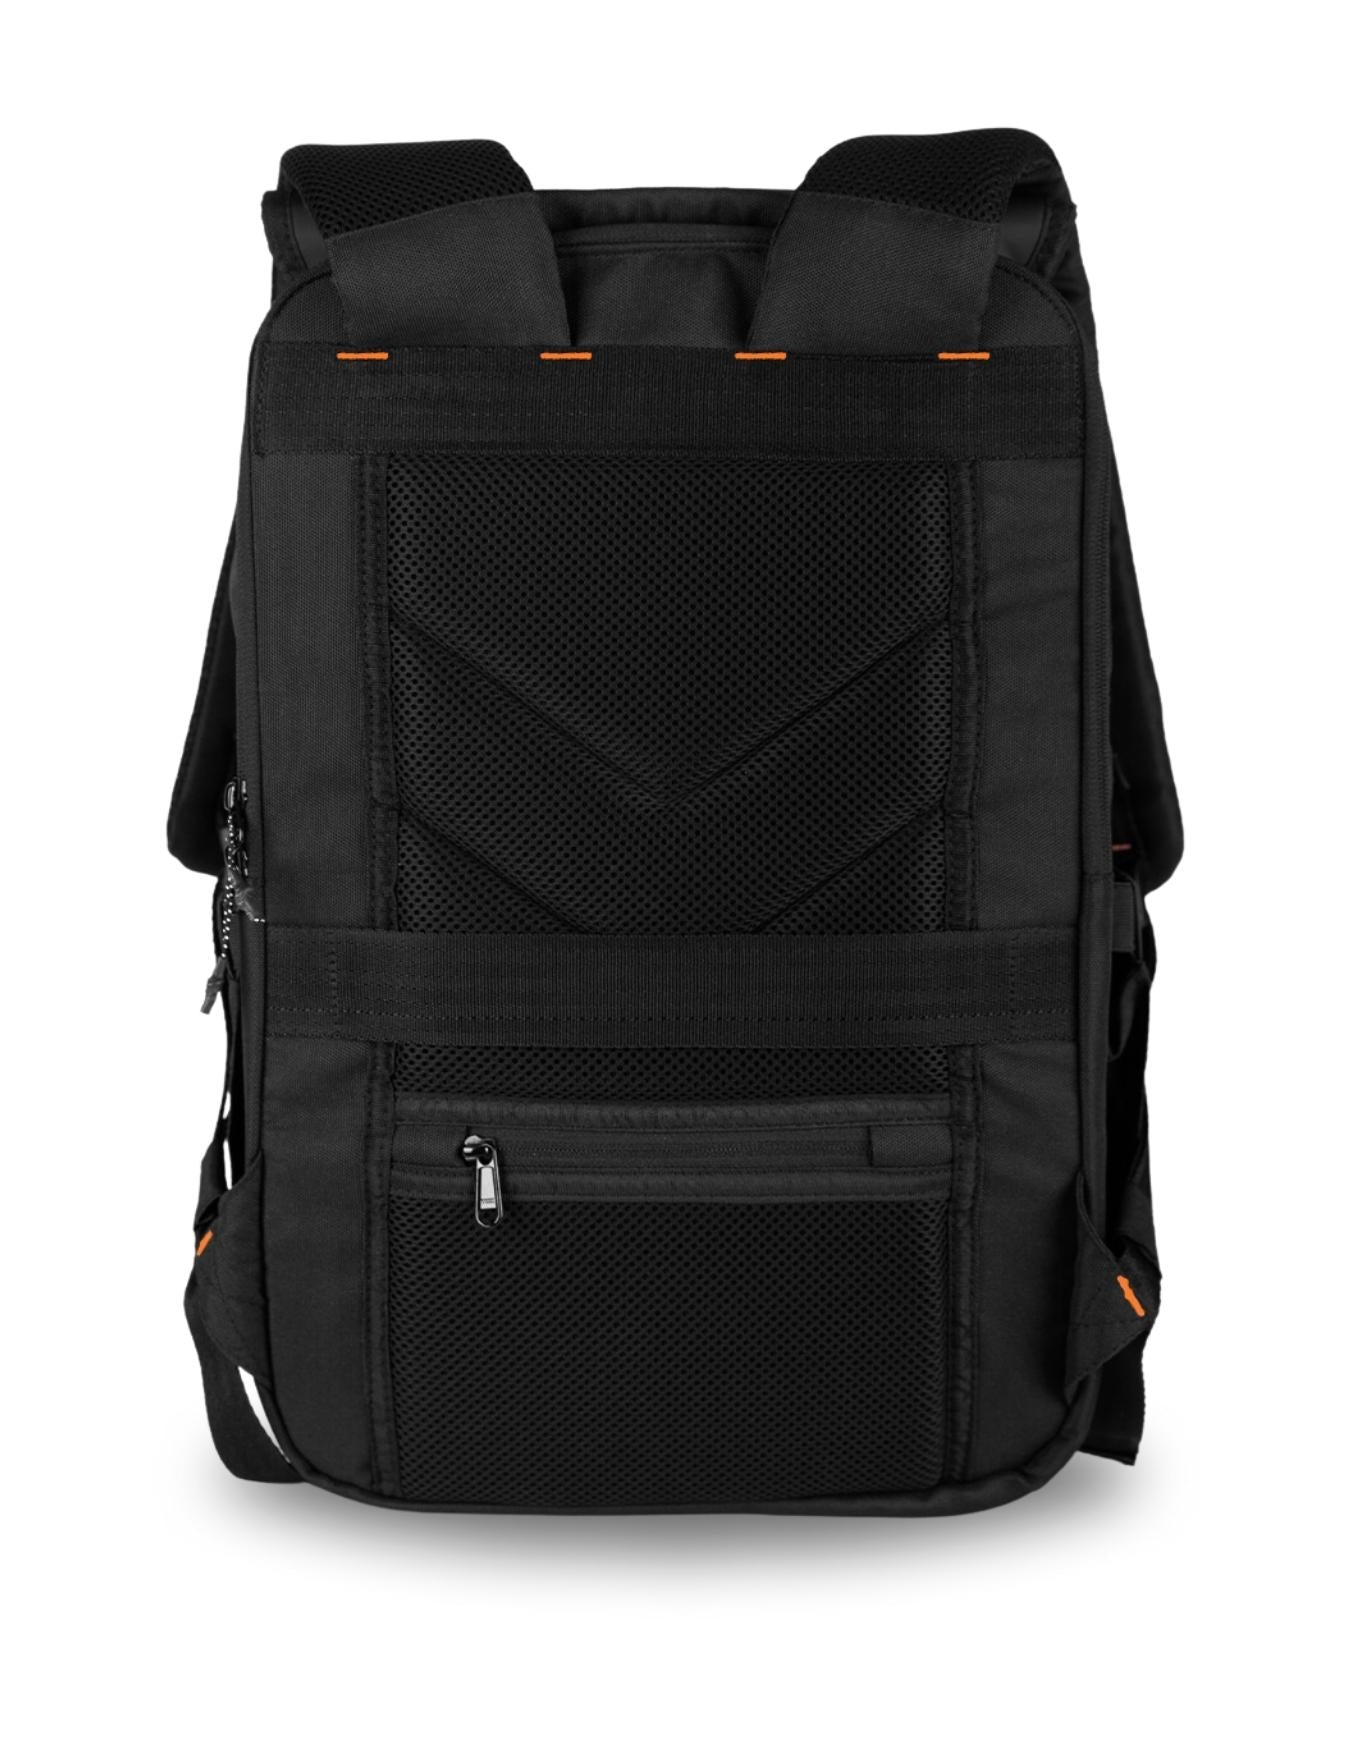 ZoPro AllPacker 22L (Limited Edition)